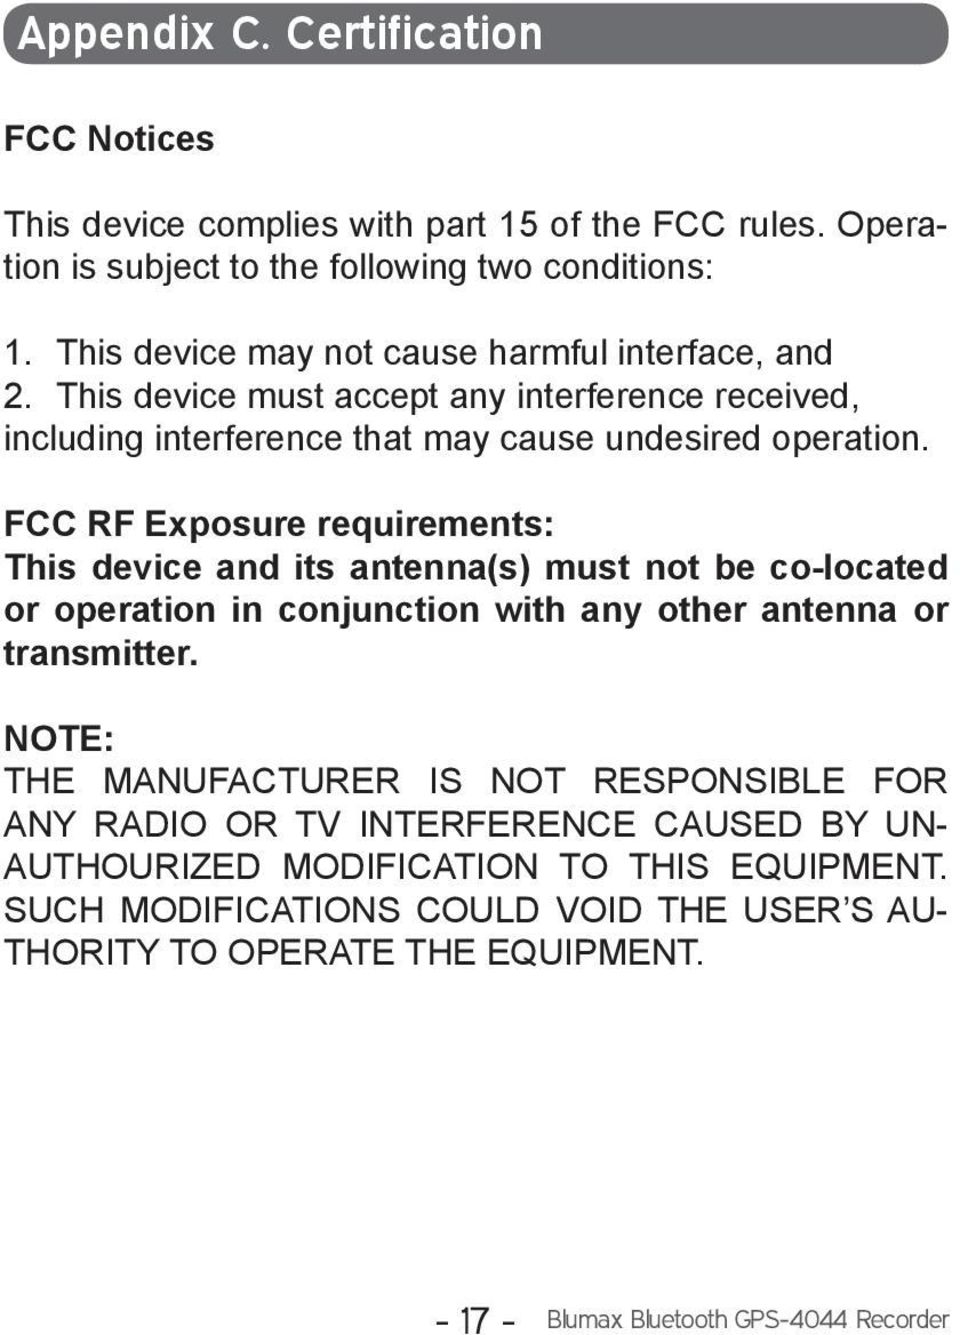 FCC RF Exposure requirements: This device and its antenna(s) must not be co-located or operation in conjunction with any other antenna or transmitter.